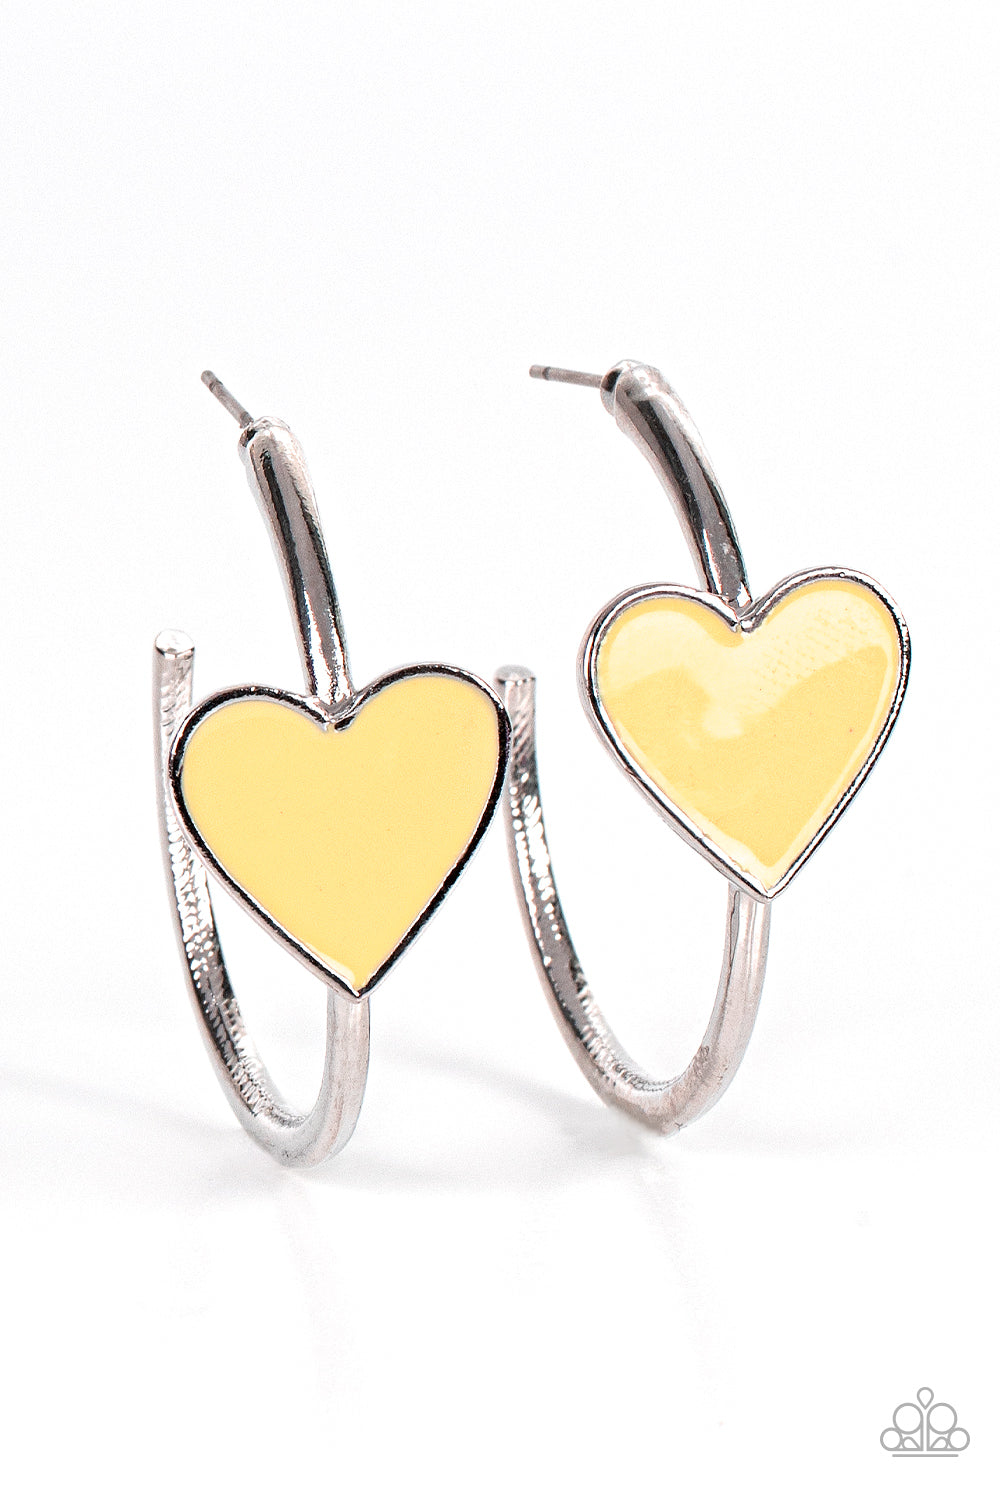 Paparazzi Accessories - Kiss Up #E568  - Yellow Earrings